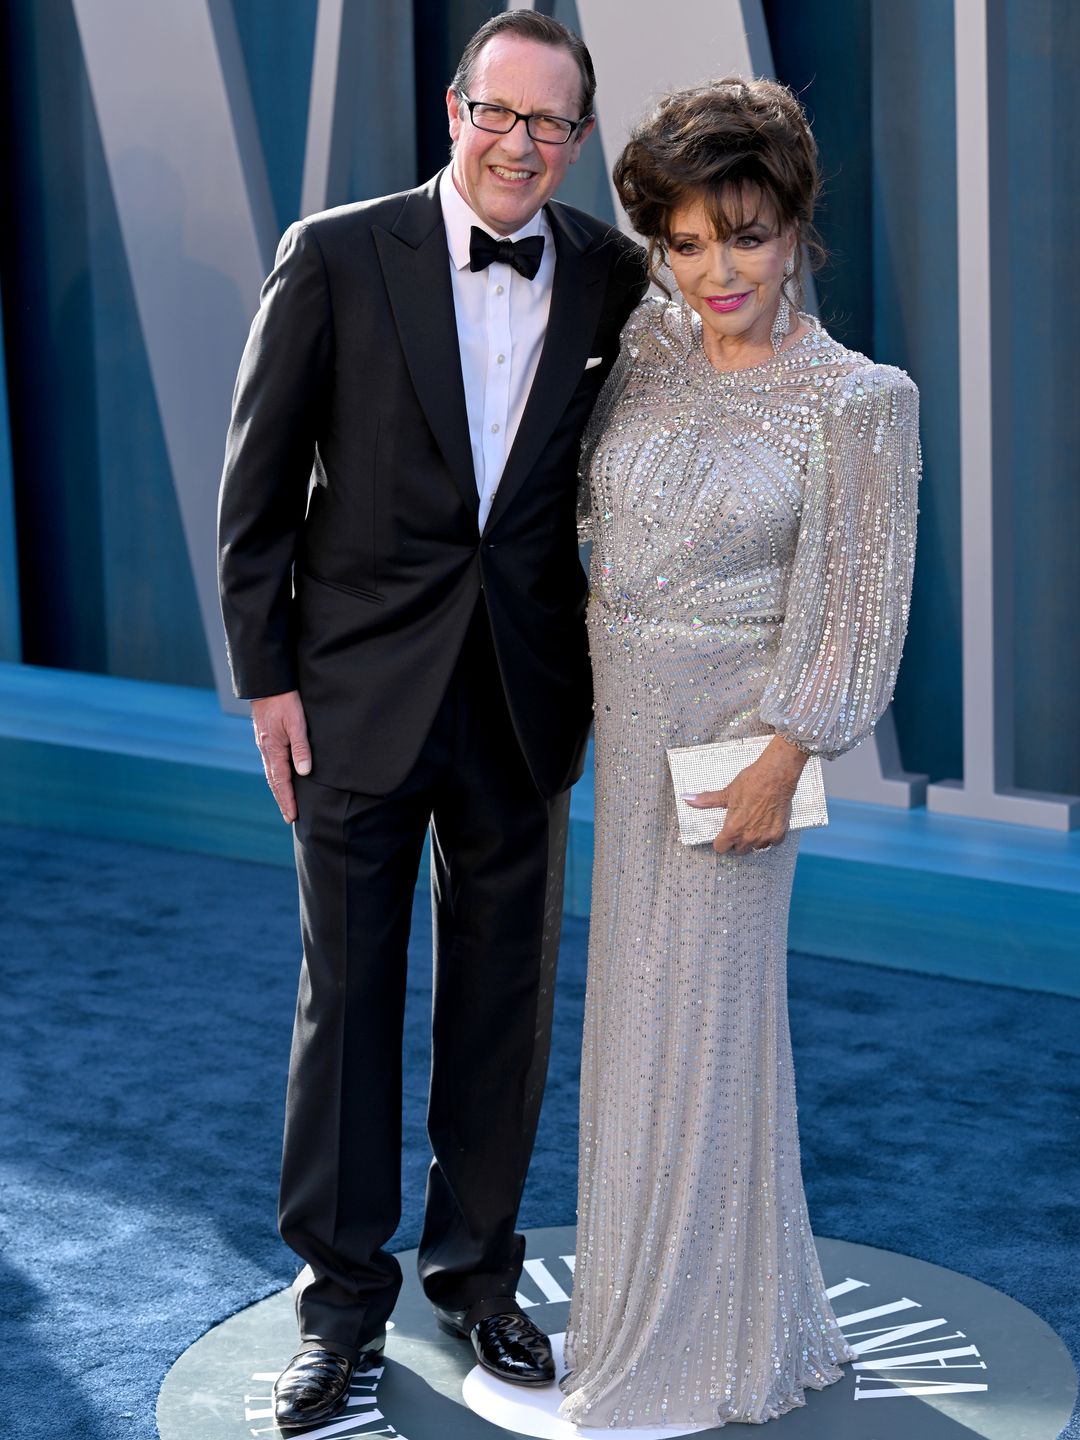 Joan with her husband Percy smiling at the Oscars in 2022